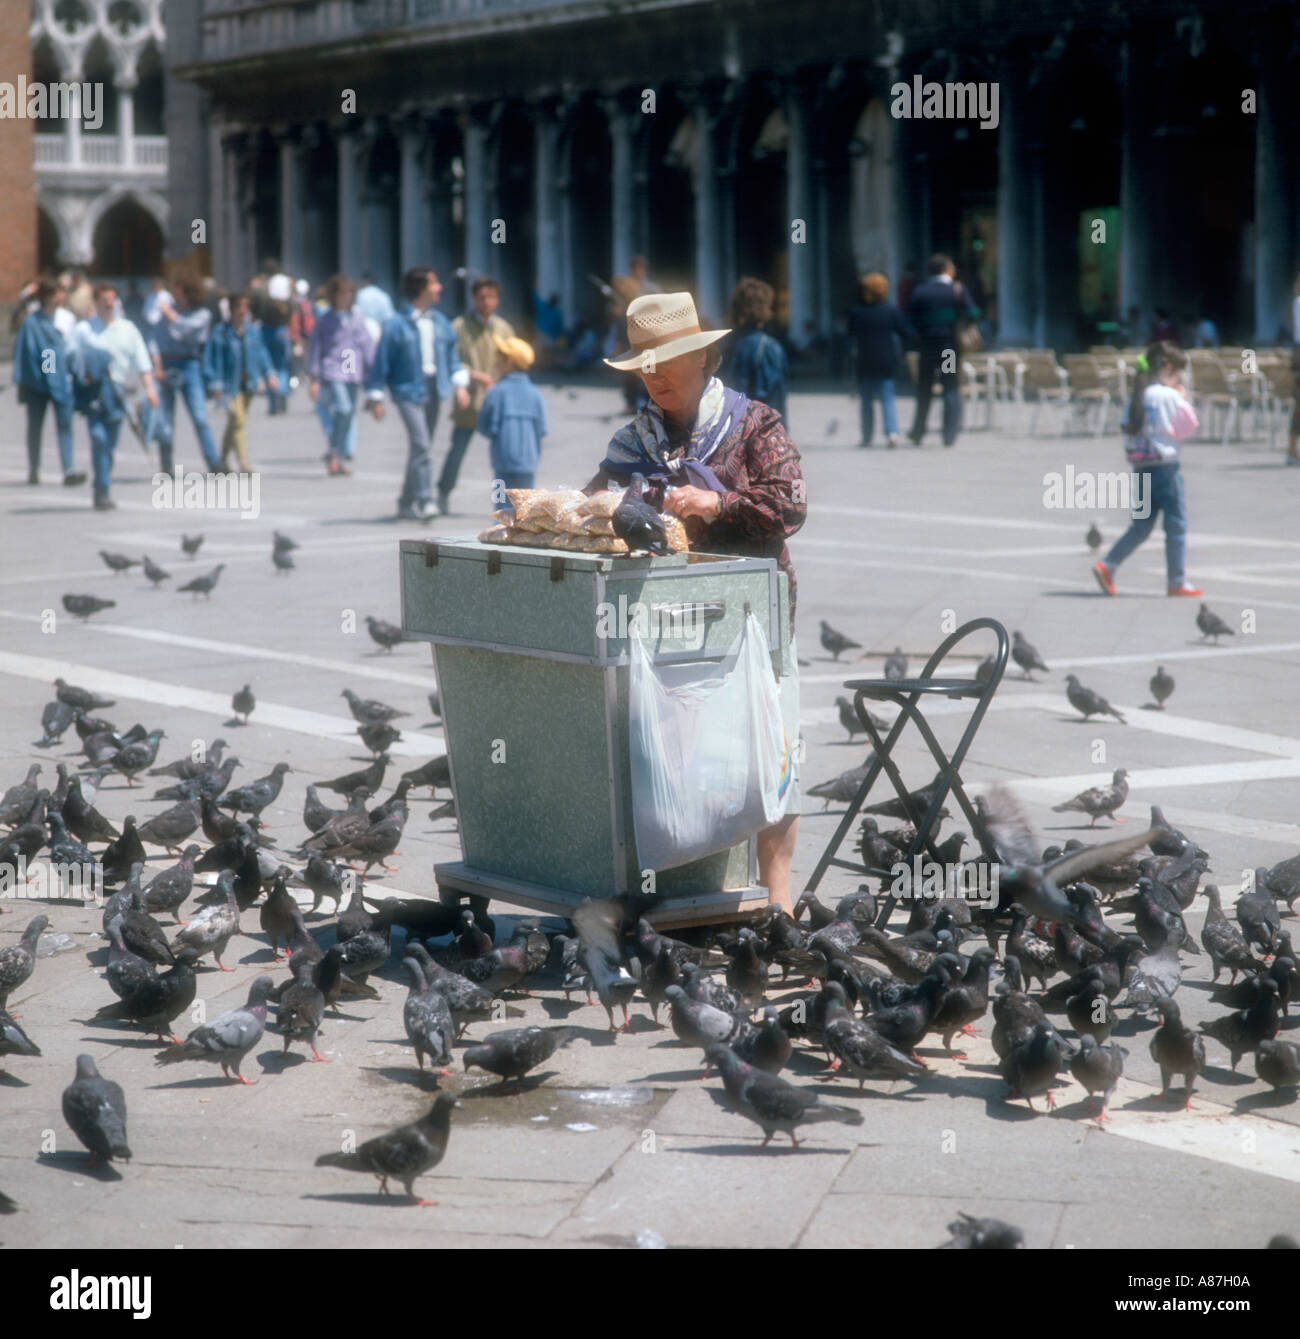 Soft focus shot of a woman selling birdseed, St Mark's Square, Venice, Italy Stock Photo